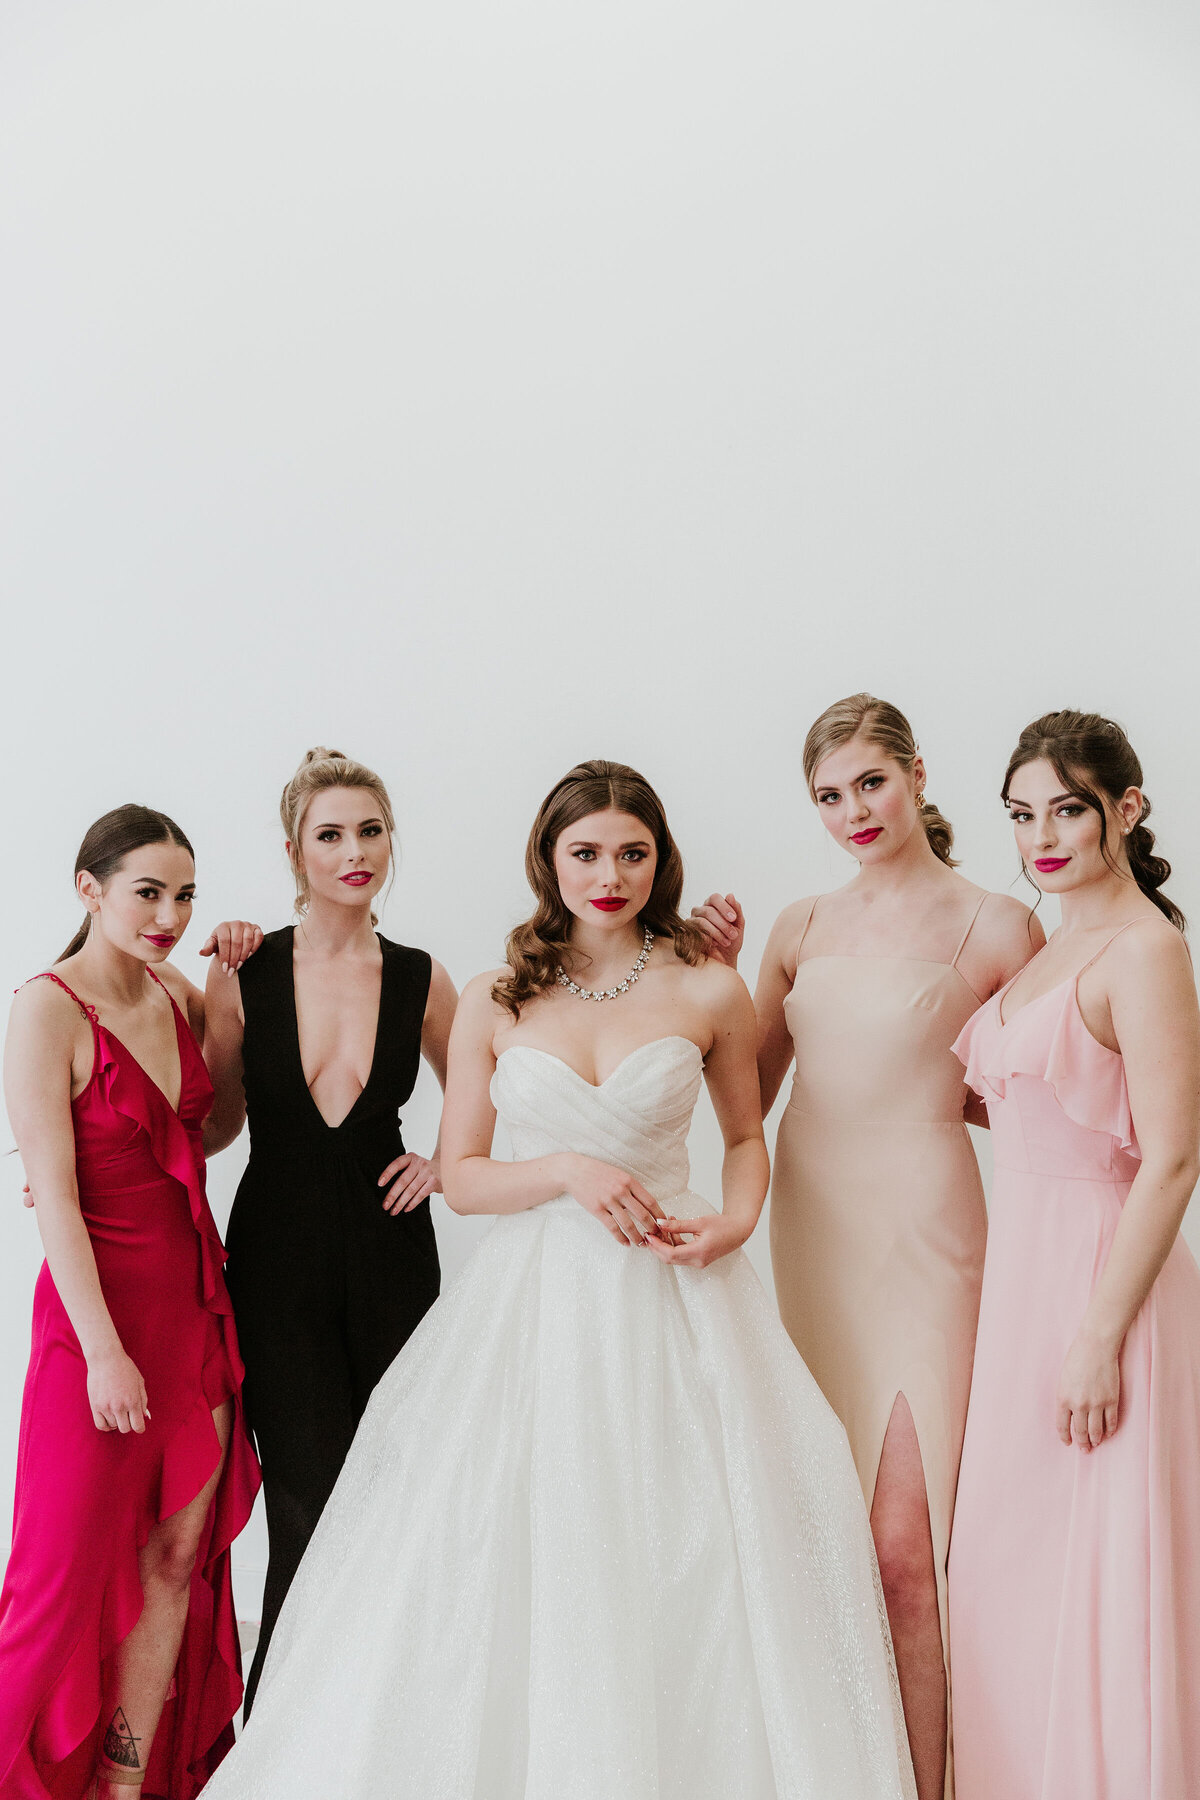 Trendy and elegant bride, bridesmaids wearing pink, black, and peach bridesmaid dresses, from Cameo & Cufflinks, a contemporary bridal boutique based in Calgary, Alberta. Featured on the Brontë Bride Vendor Guide.